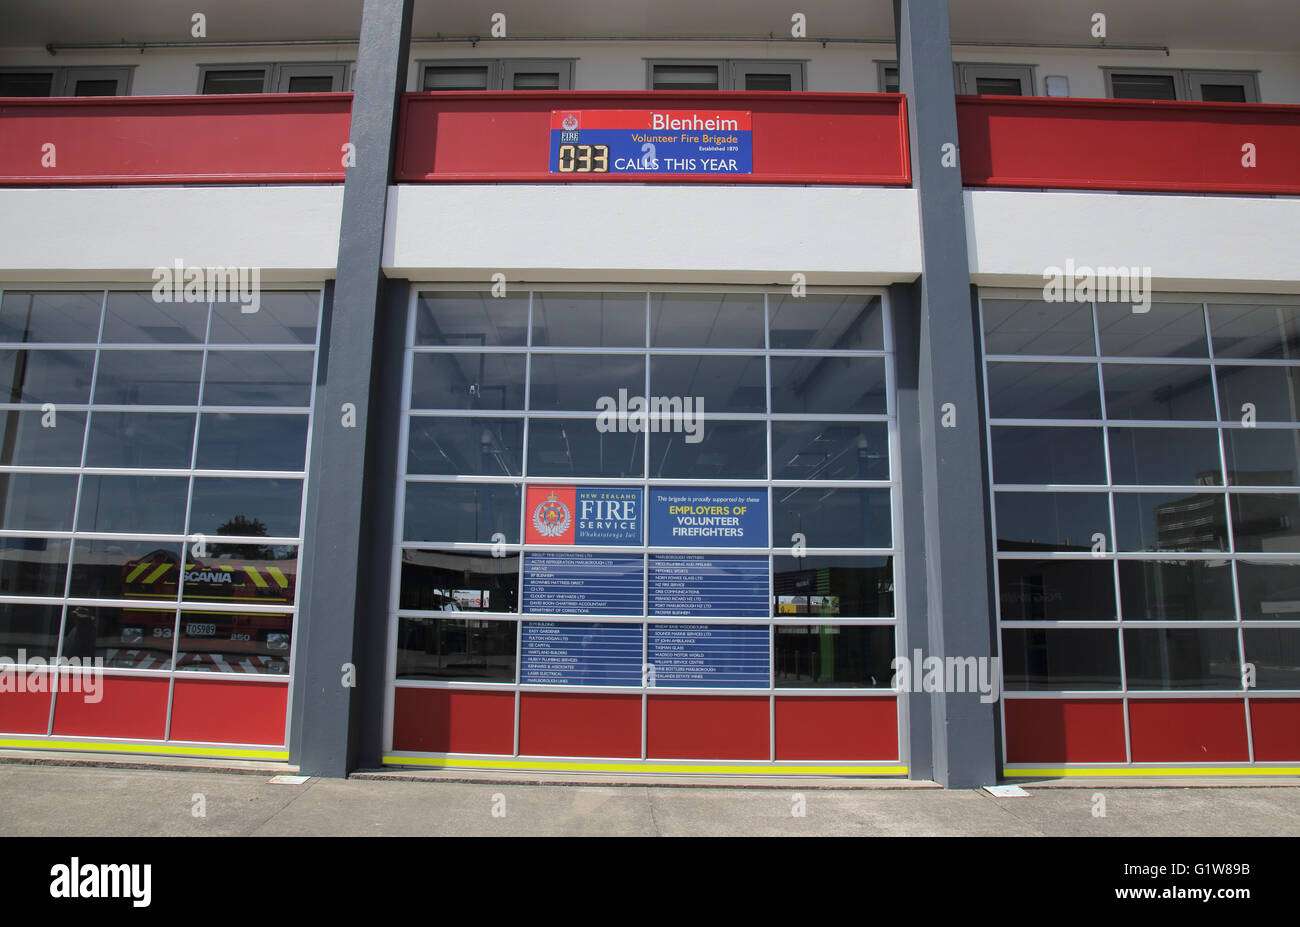 fire station in blenheim south island new zealand Stock Photo